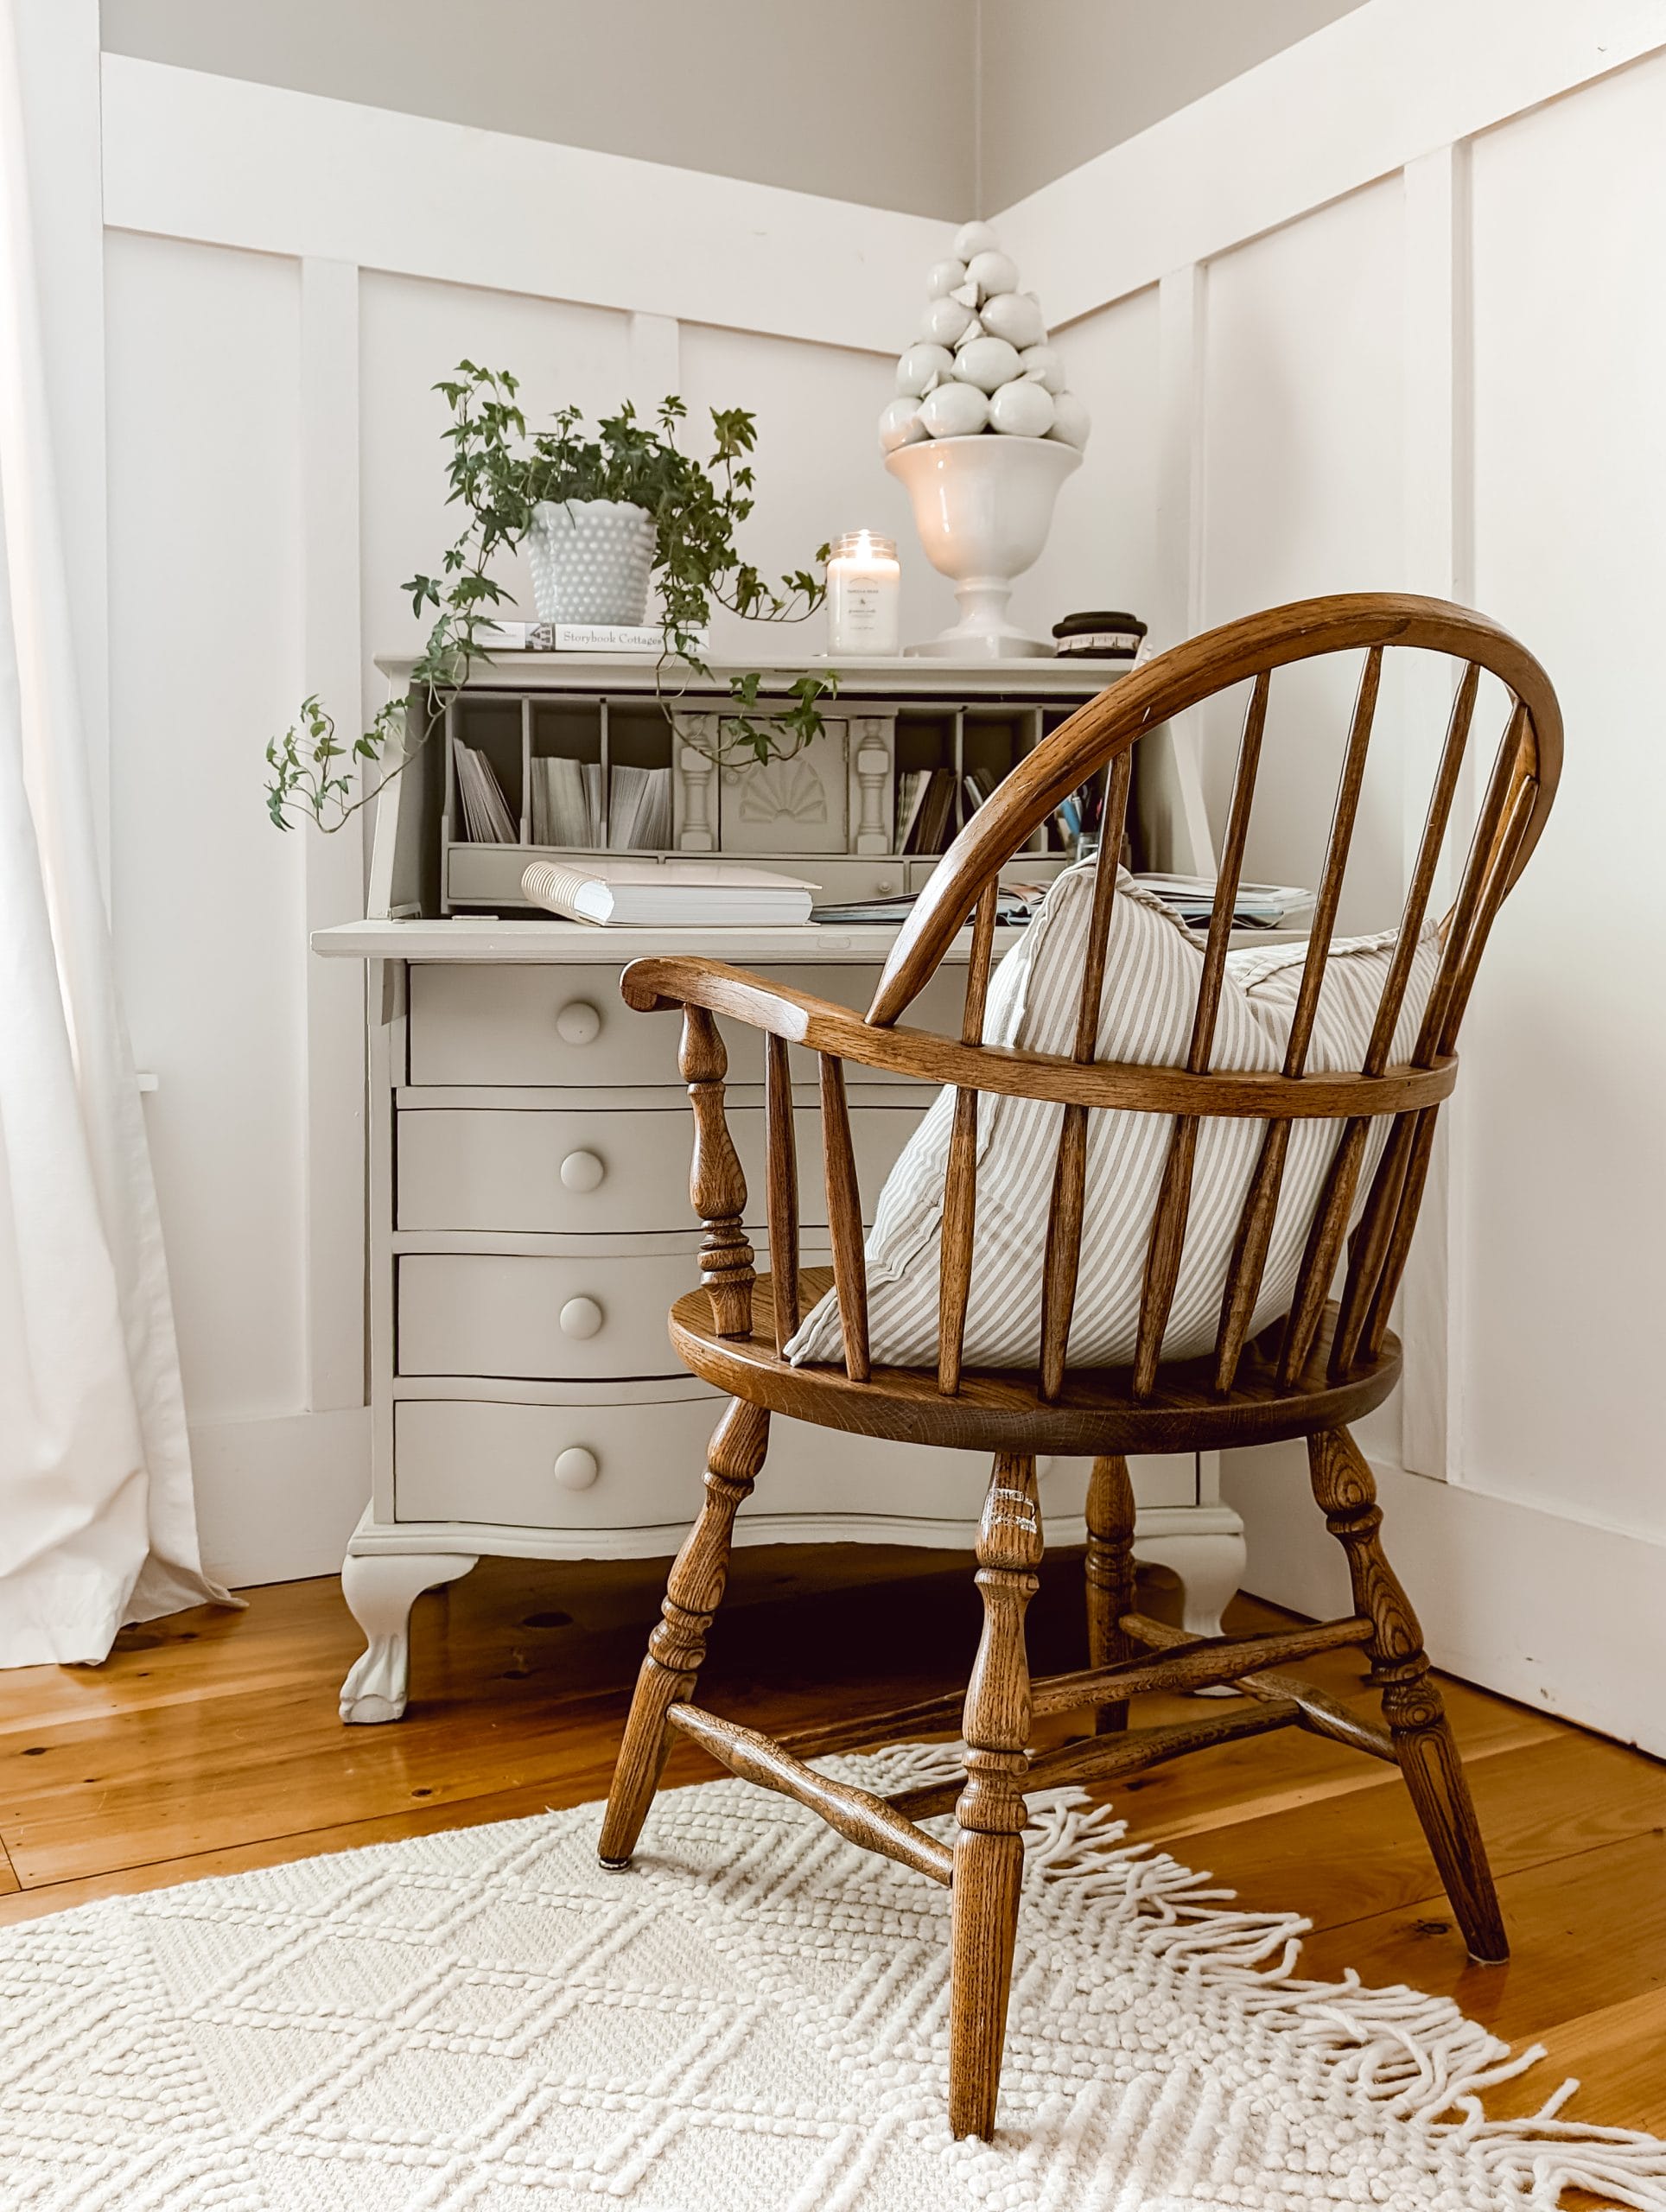 painted secretary desk and a wooden sitting chair in a cottage corner workspace